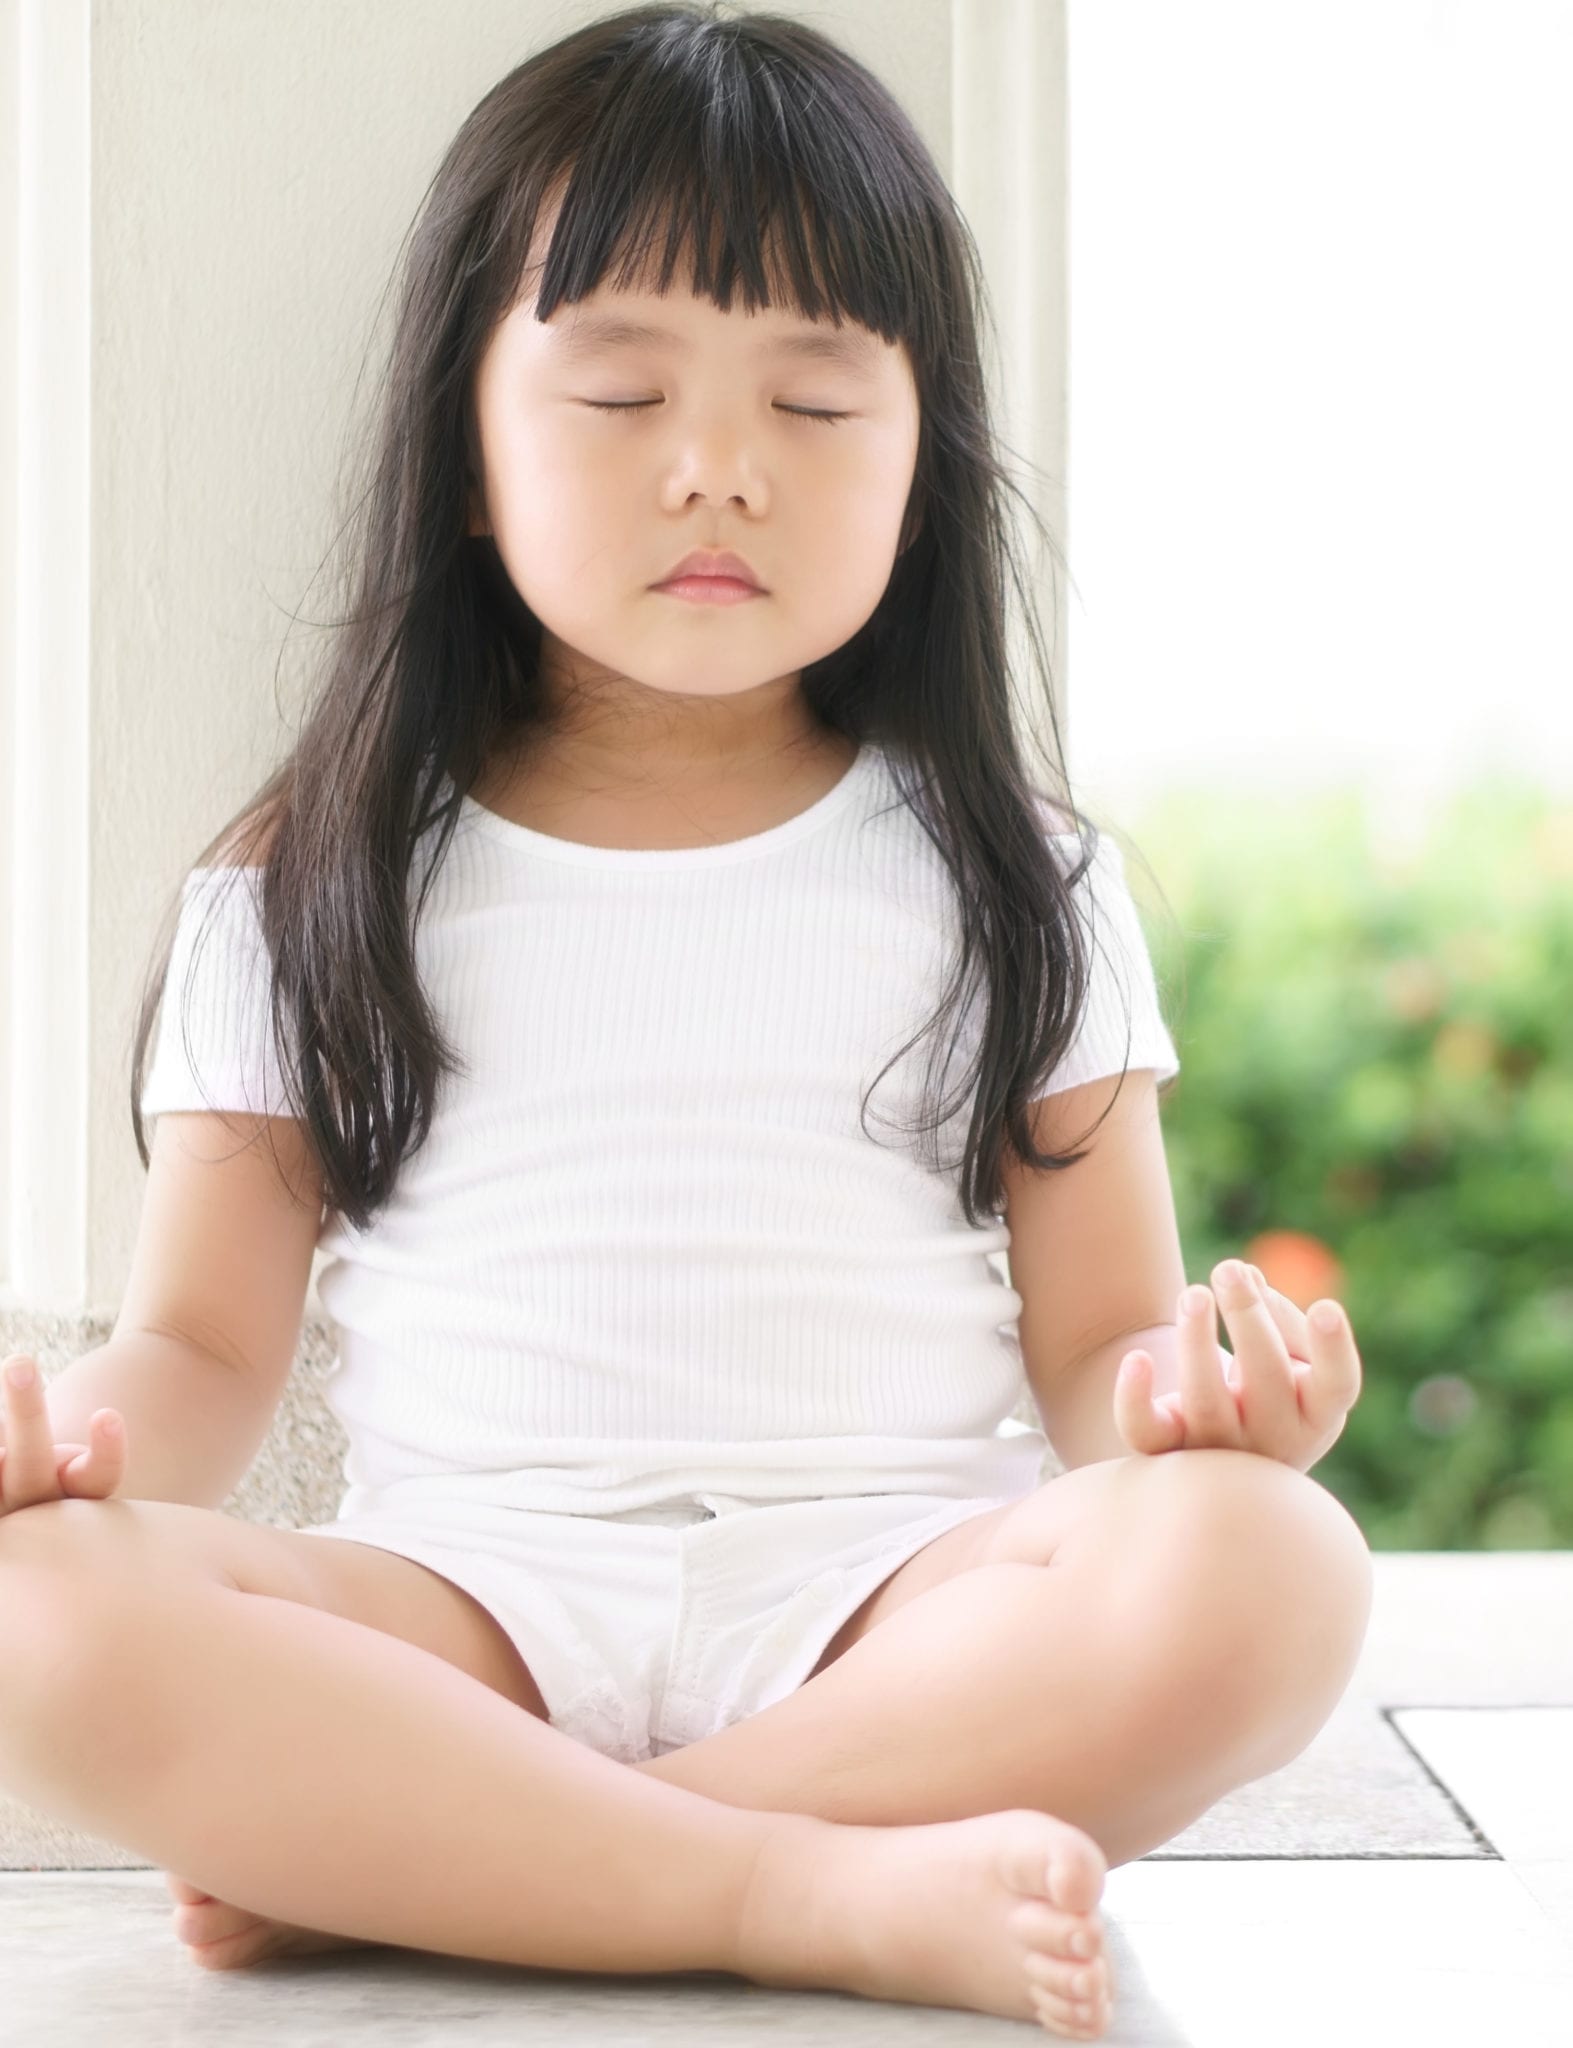 Creating a Mindful Classroom